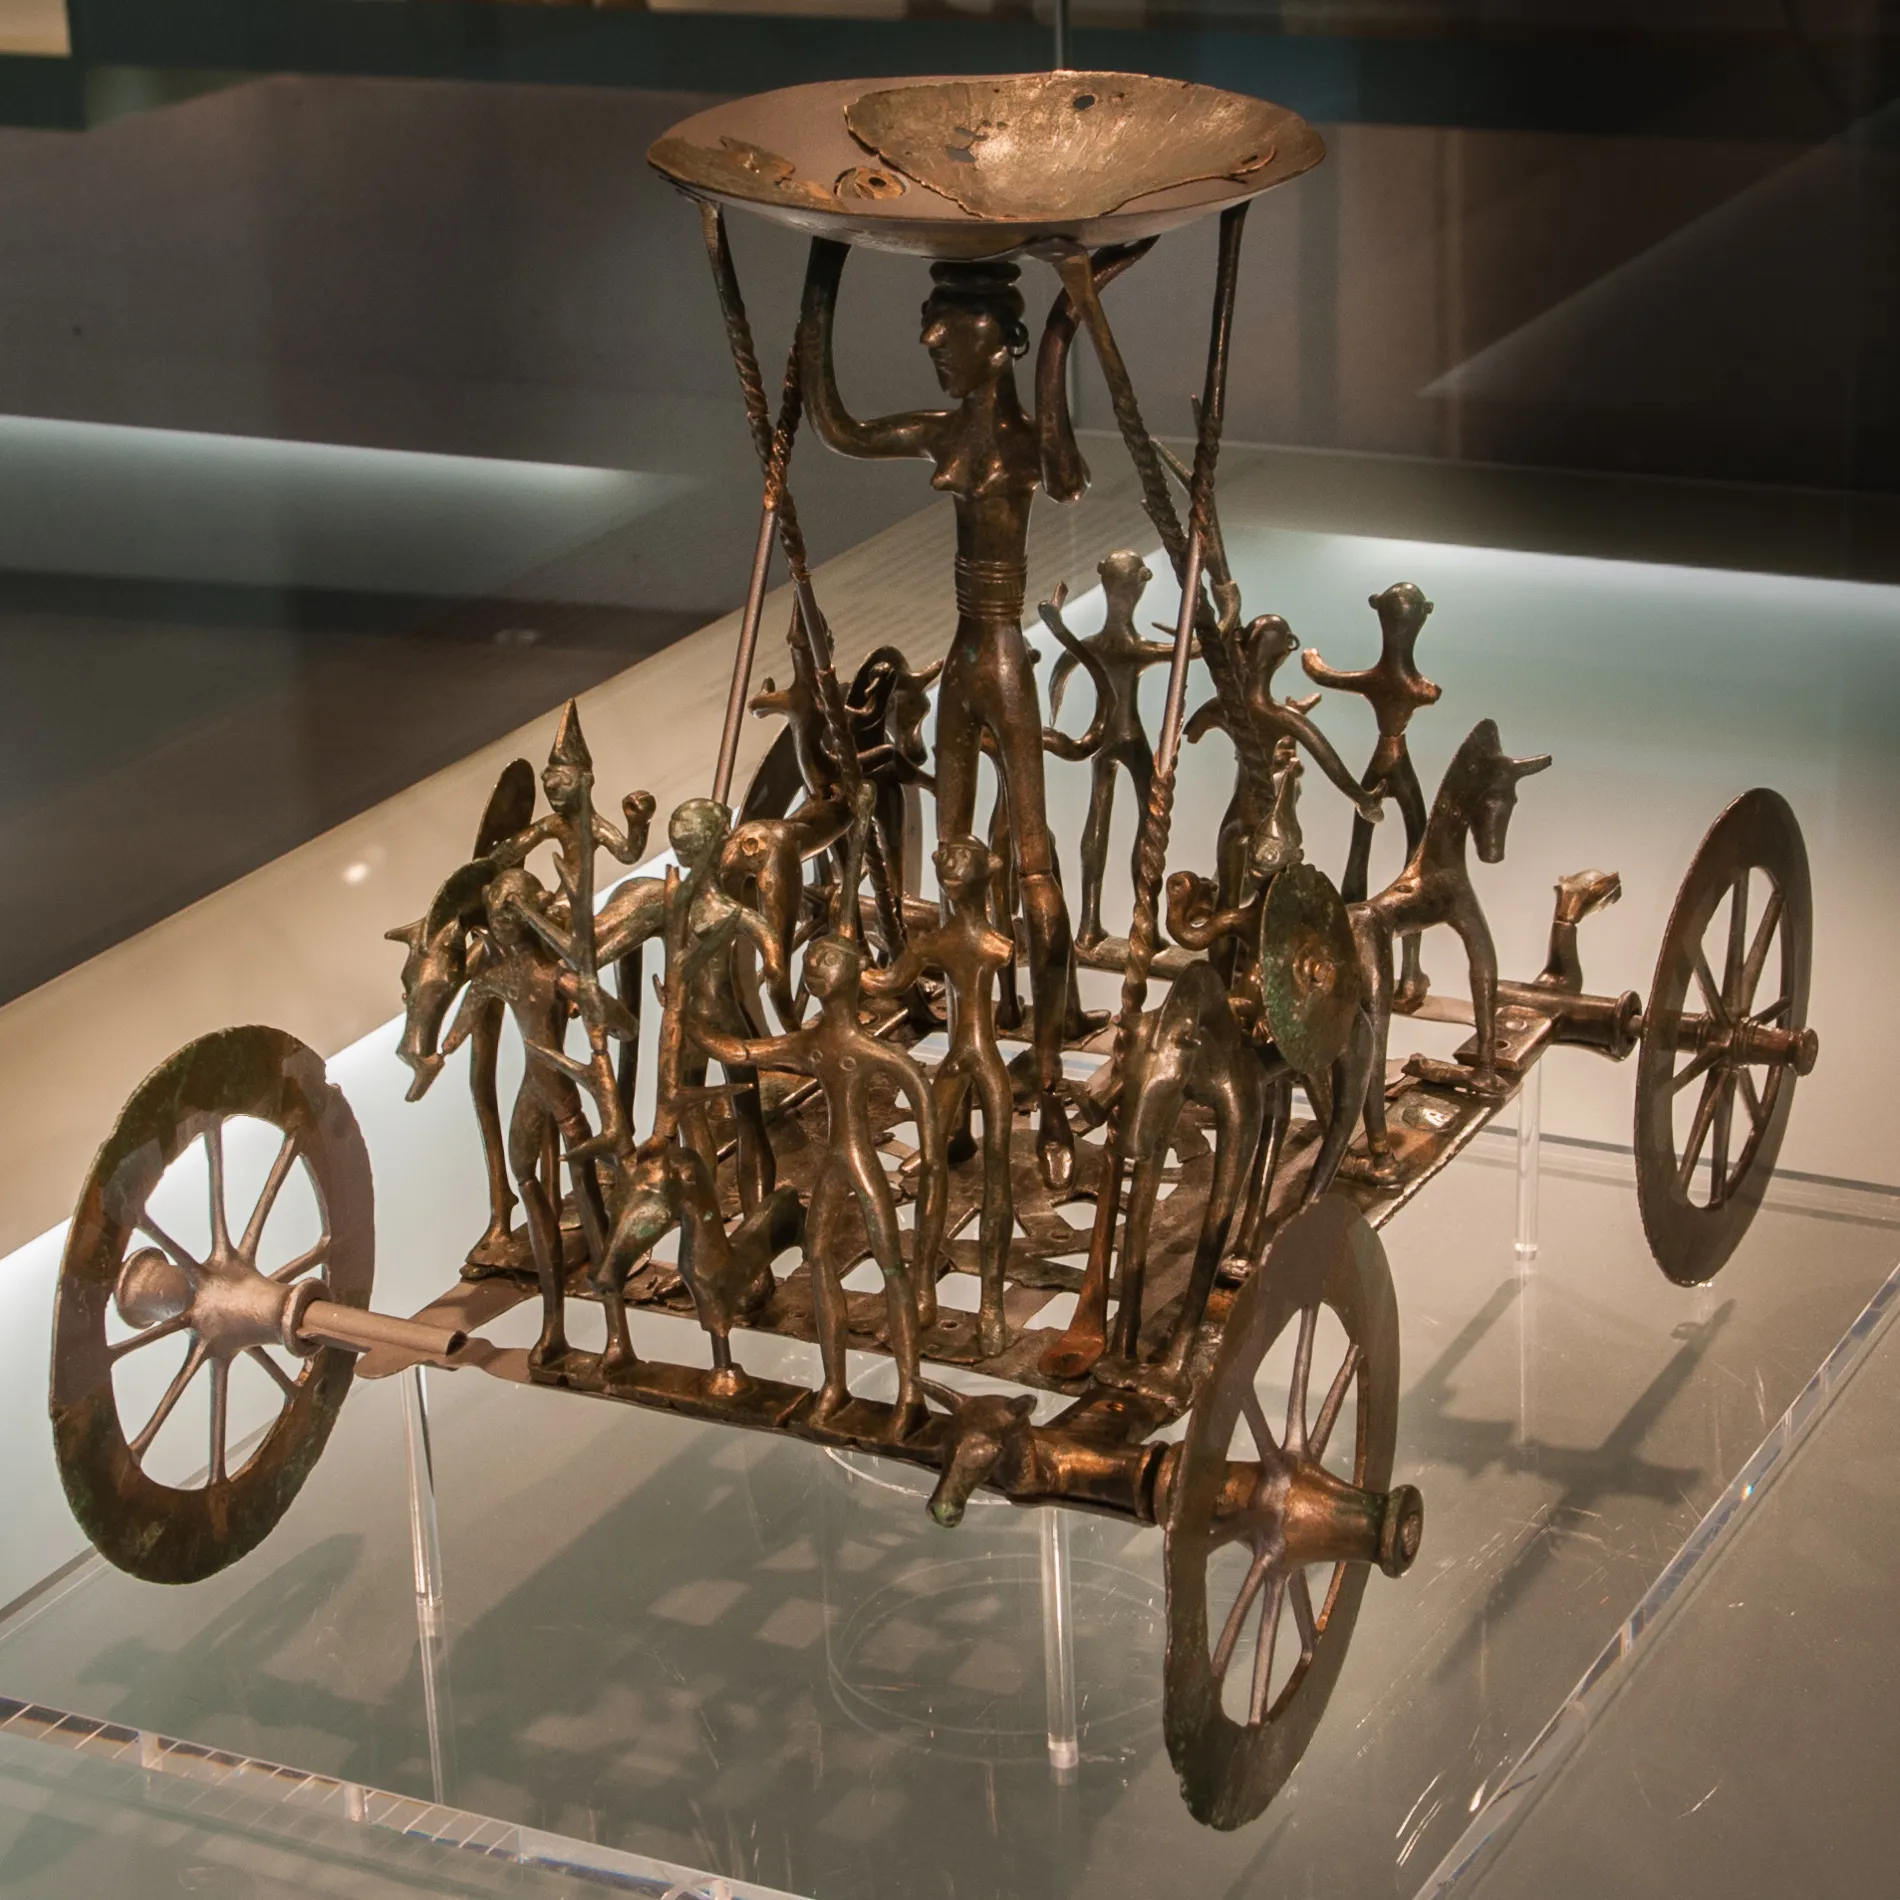 Photo showing: The cult car of Strettweg in the Archaeology Museum in Graz, Austria.